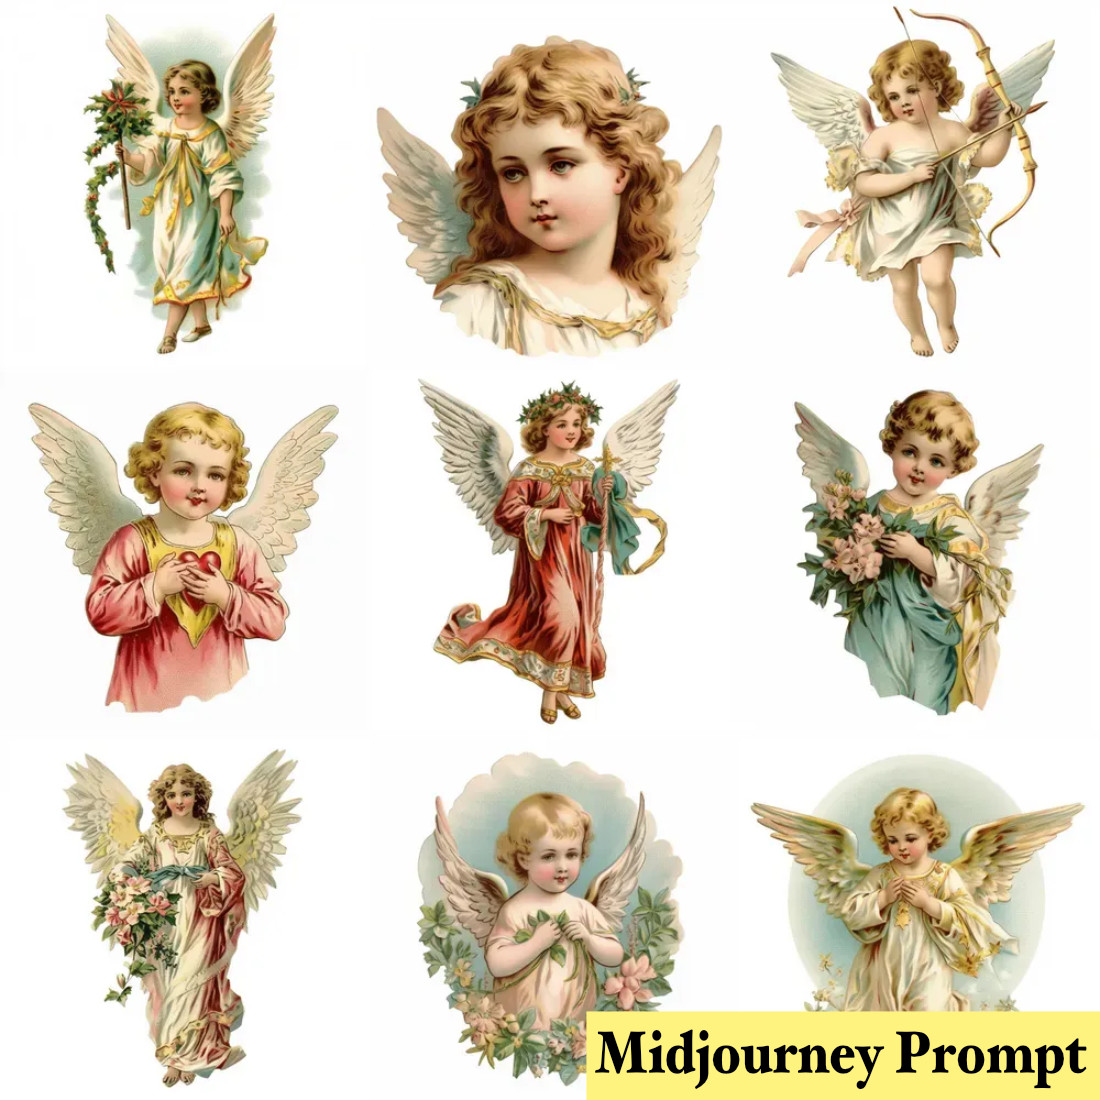 Vintage Angels Cliparts Midjourney Prompt cover image.